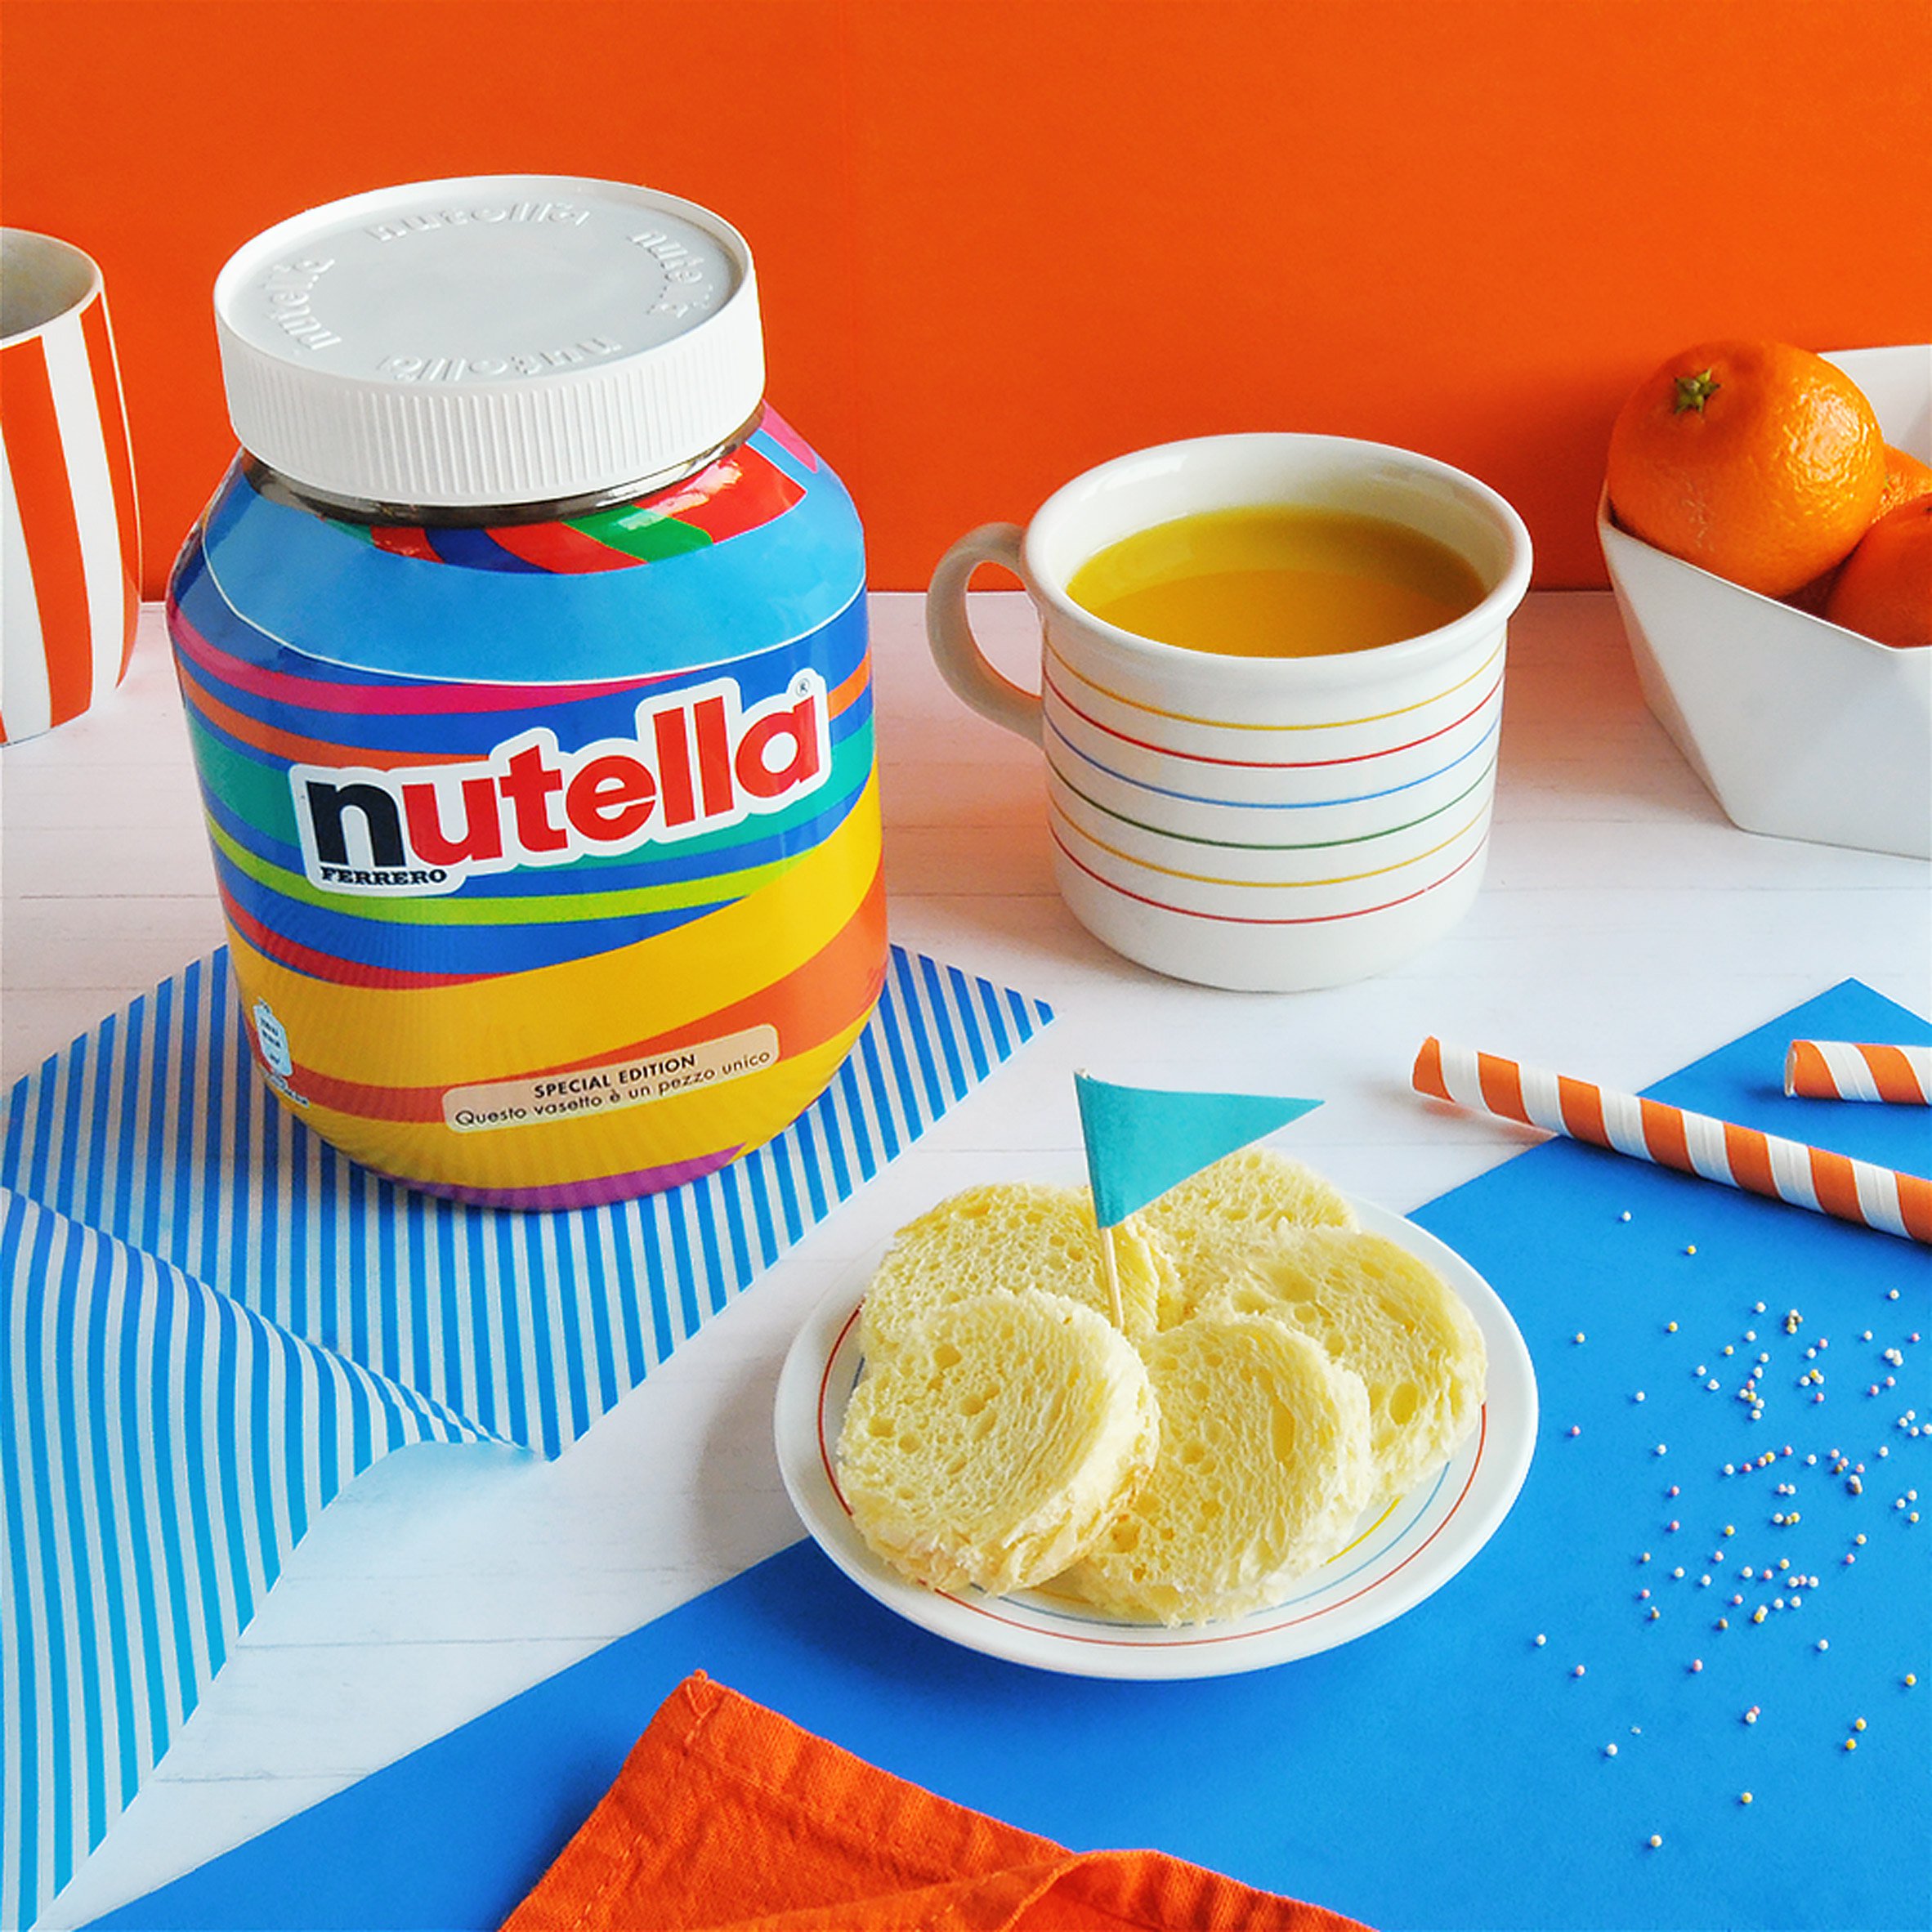 nutella-unica-packaging-design-products-_dezeen_2364_col_3